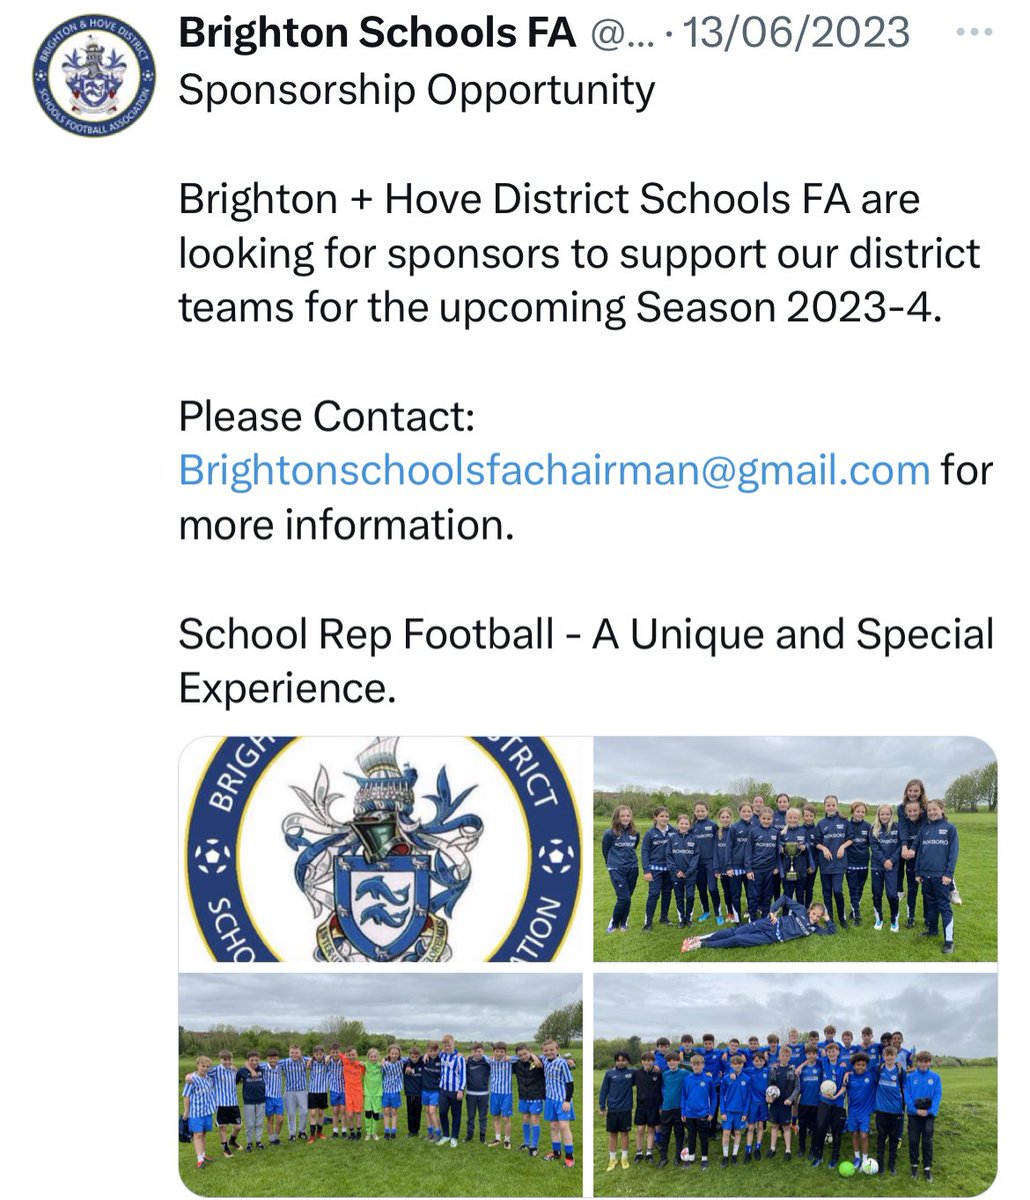 Any local #brighton #hove businesses interested in sponsorship some highly successful, driven and commitment school football teams #investinthefuture